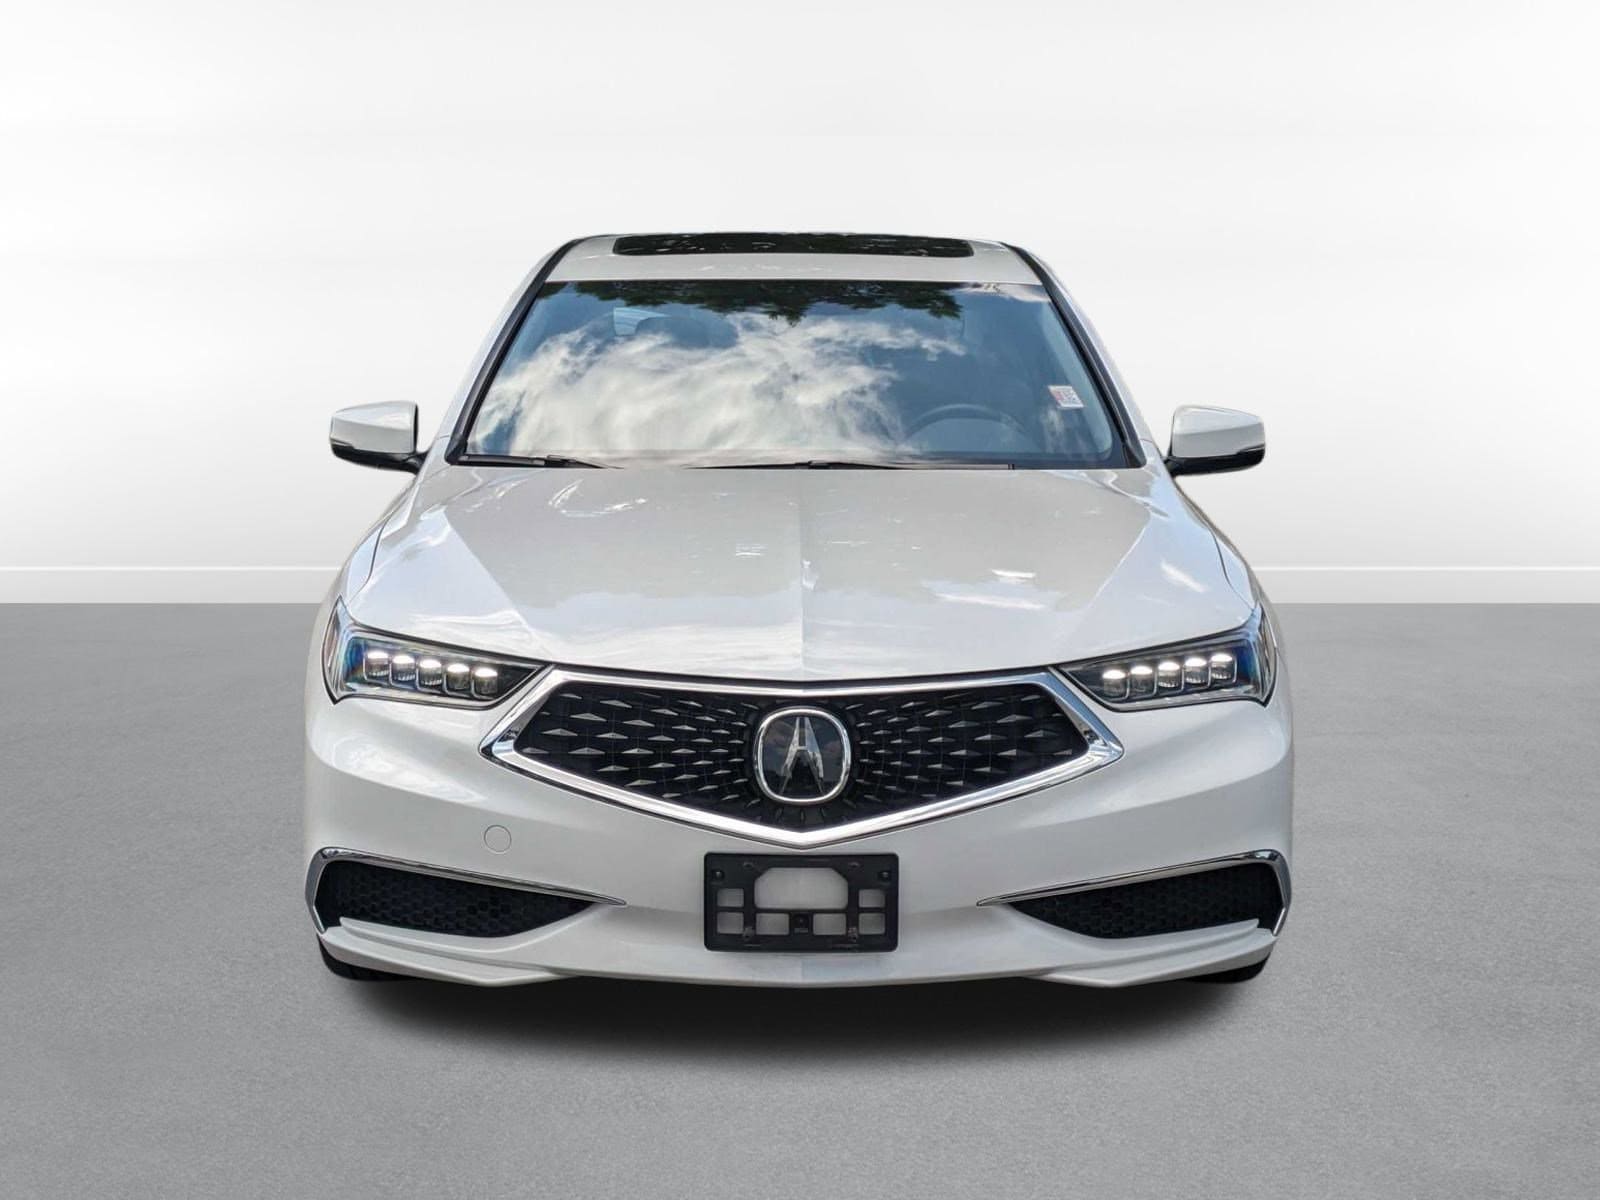 Used 2019 Acura TLX Technology Package with VIN 19UUB2F40KA008342 for sale in Raleigh, NC